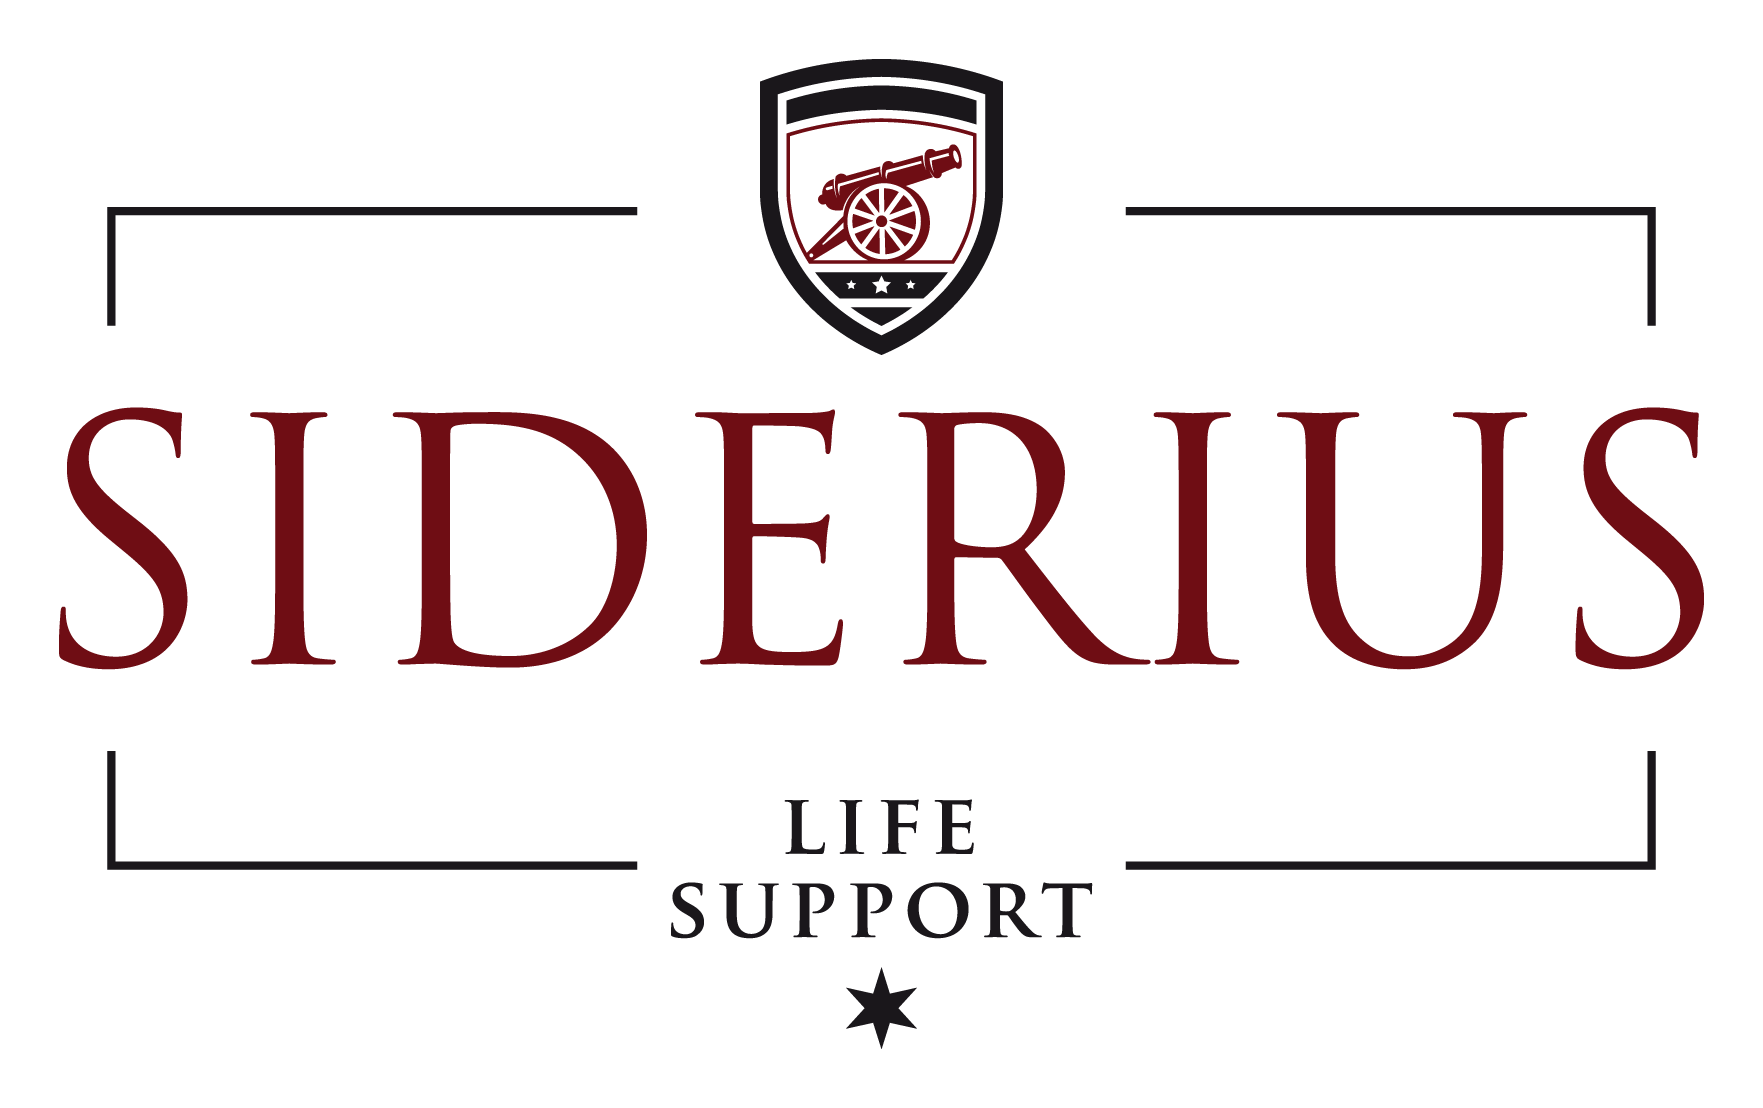 SIDERIUS - Life Support